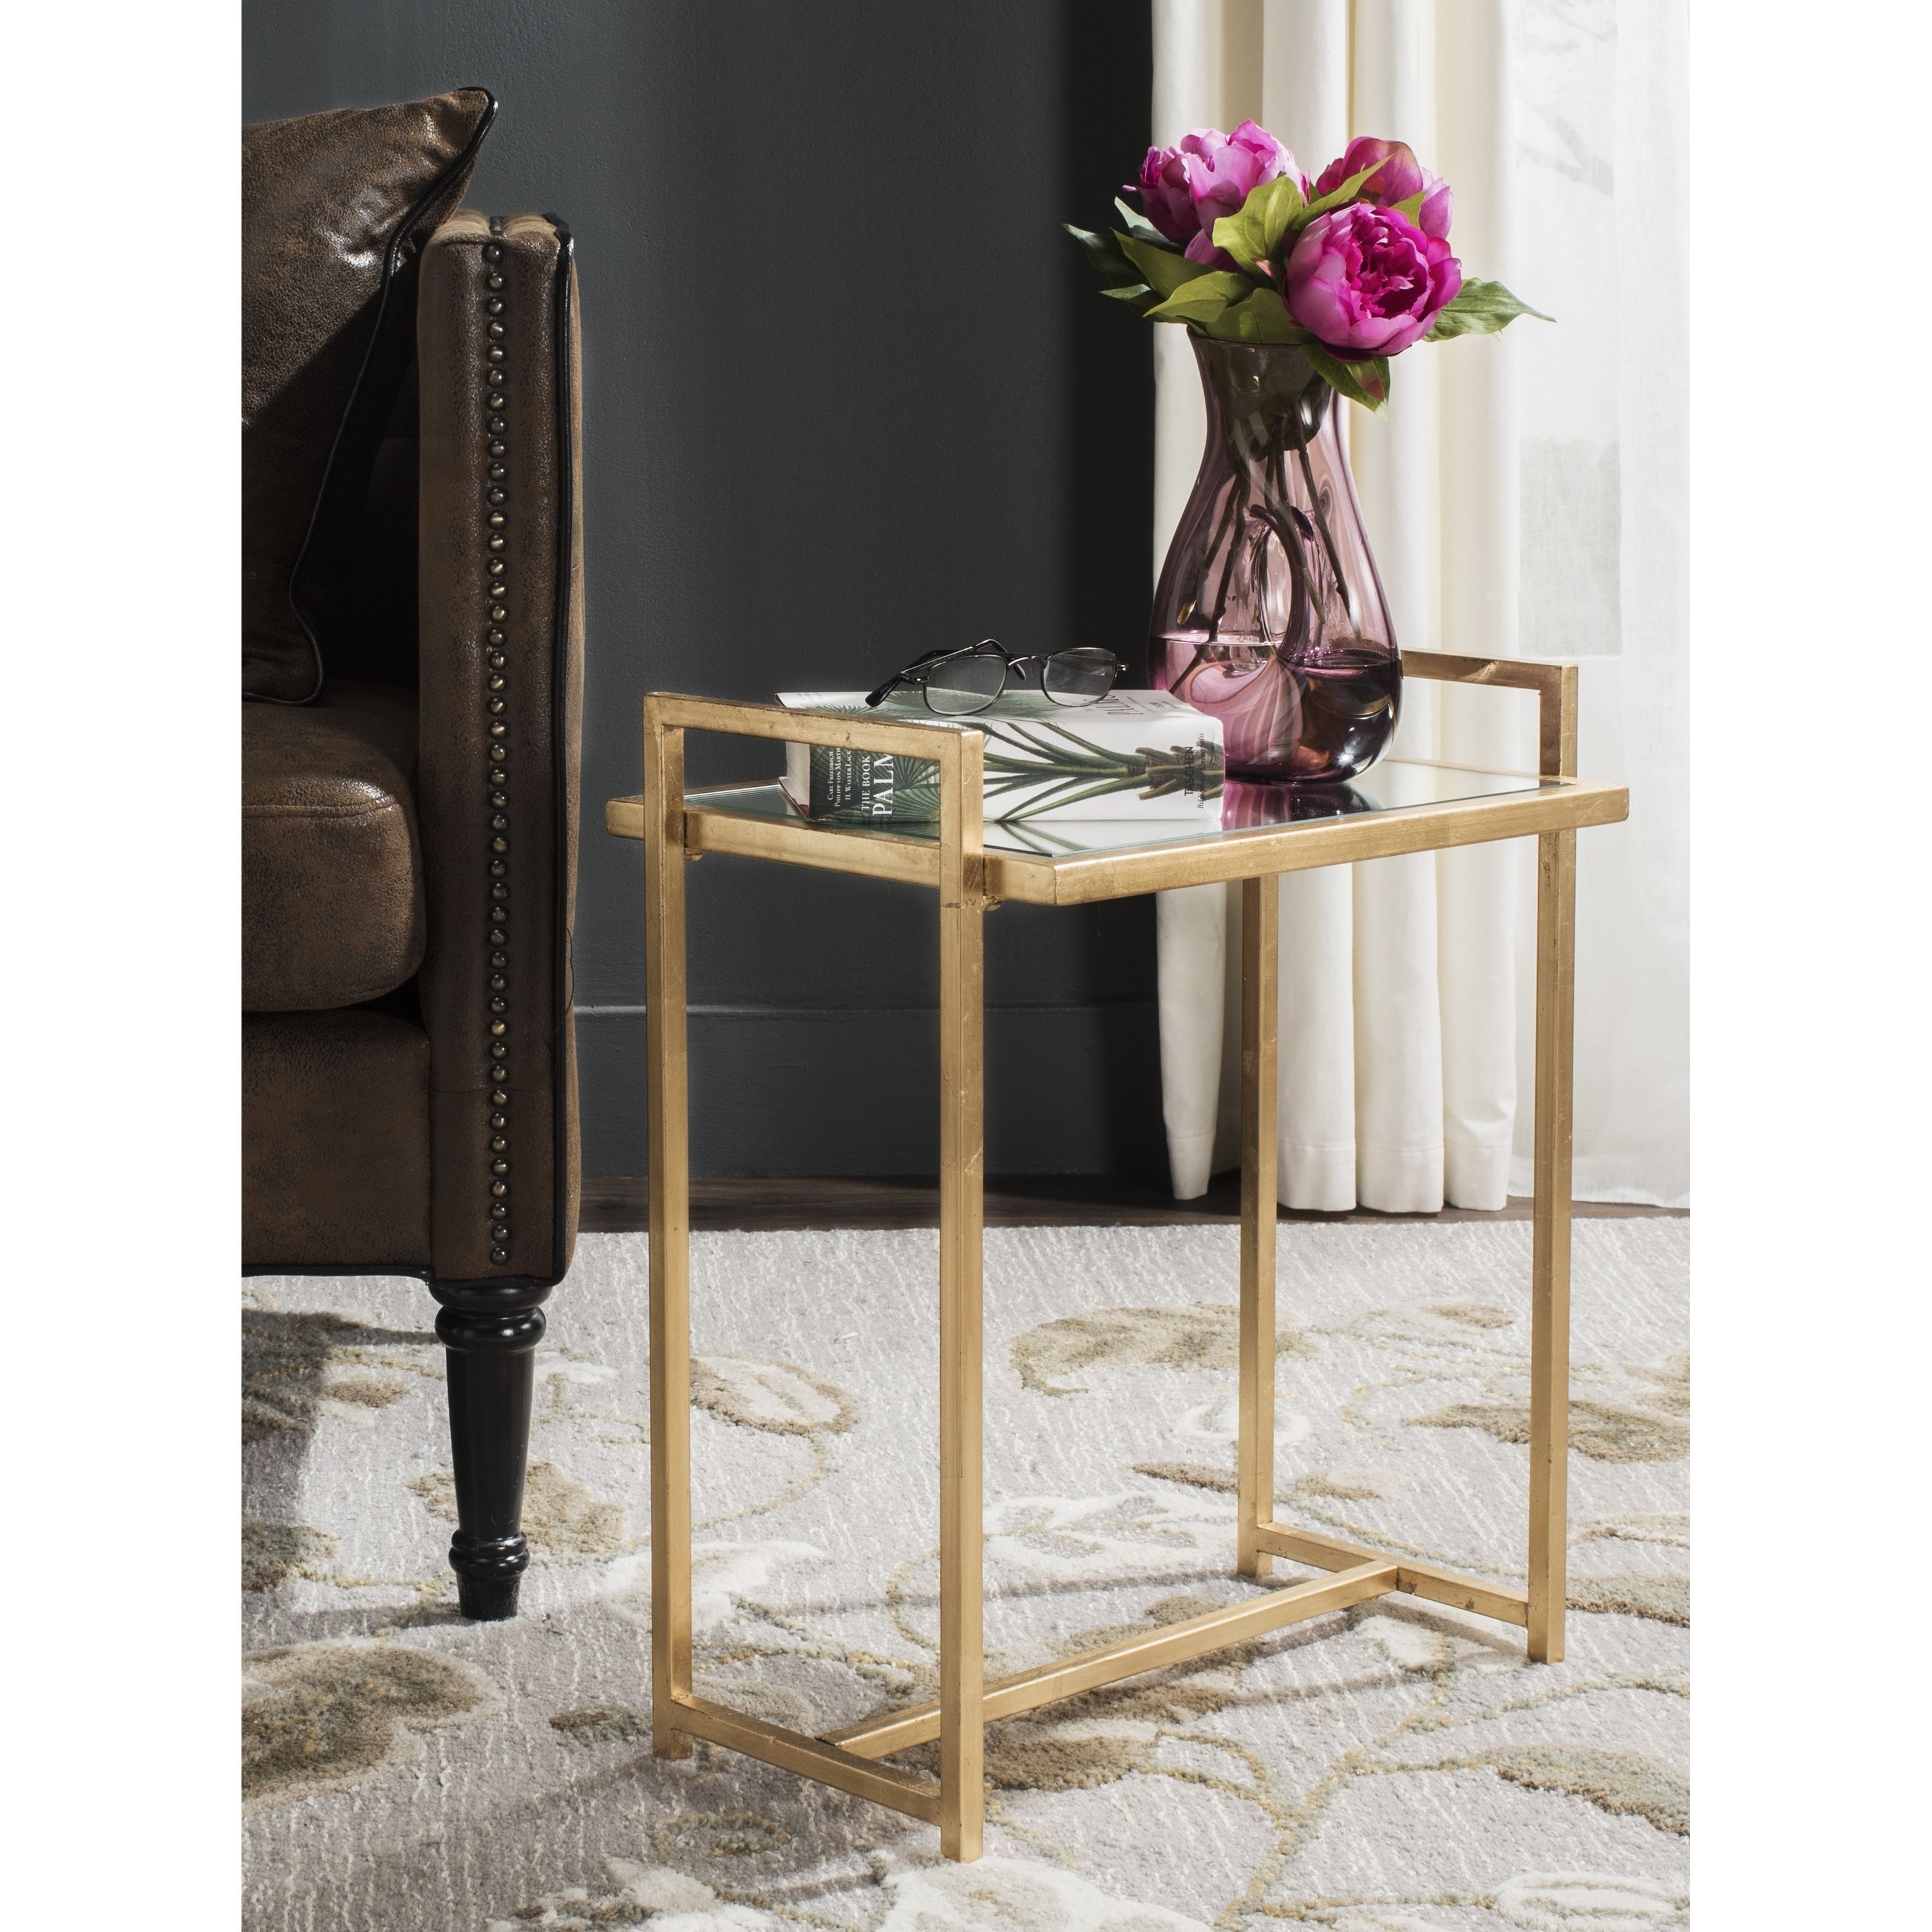 safavieh renly antique gold leaf end table products accent mirrored cabinets and chests tool chest with tools martha stewart outdoor furniture black legs desk lamp wine rack new